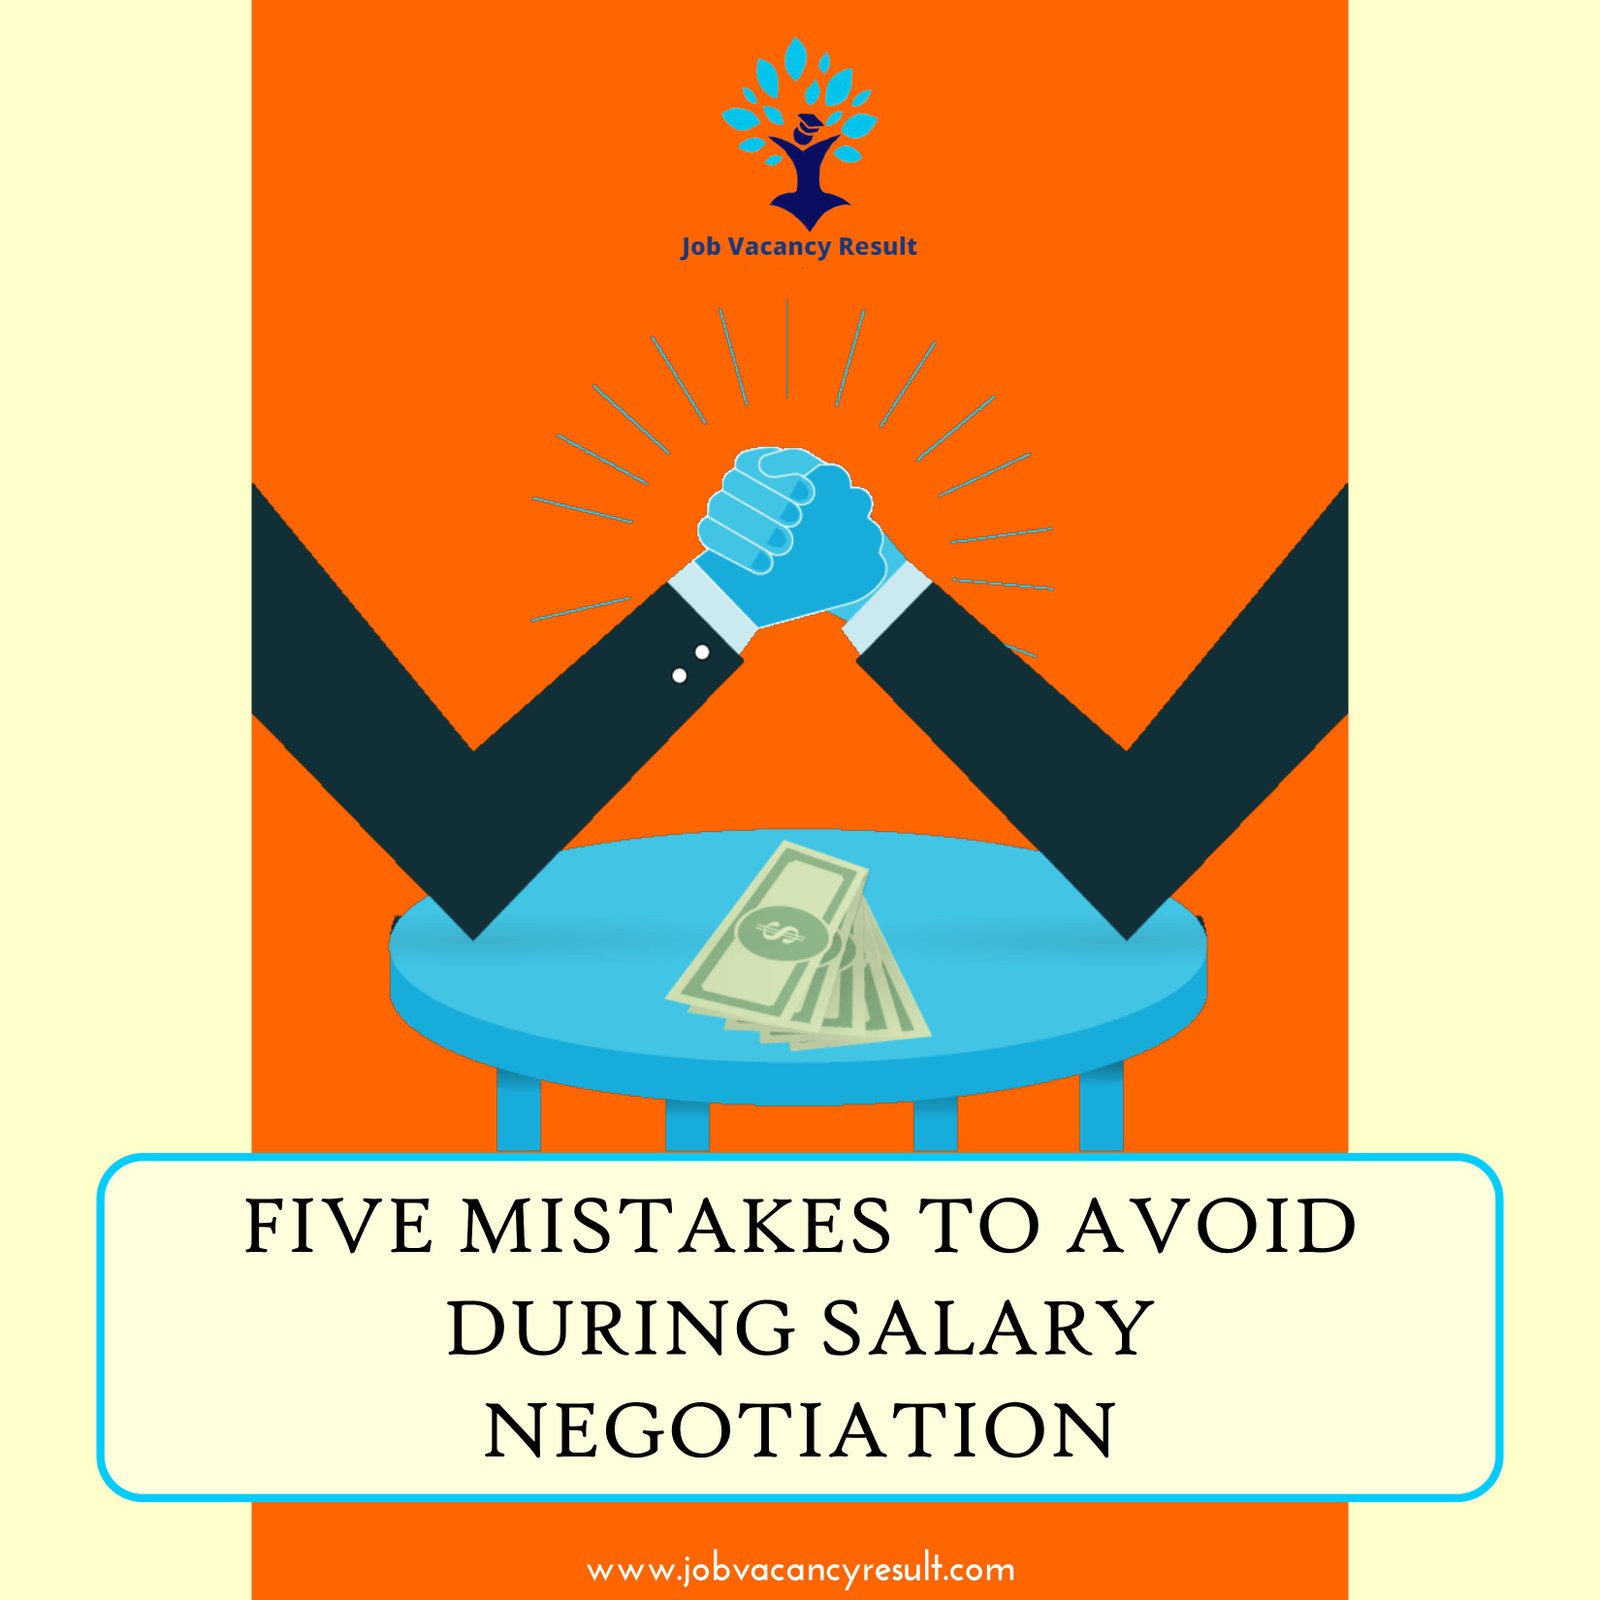 5 Mistakes to avoid during salary negotiation